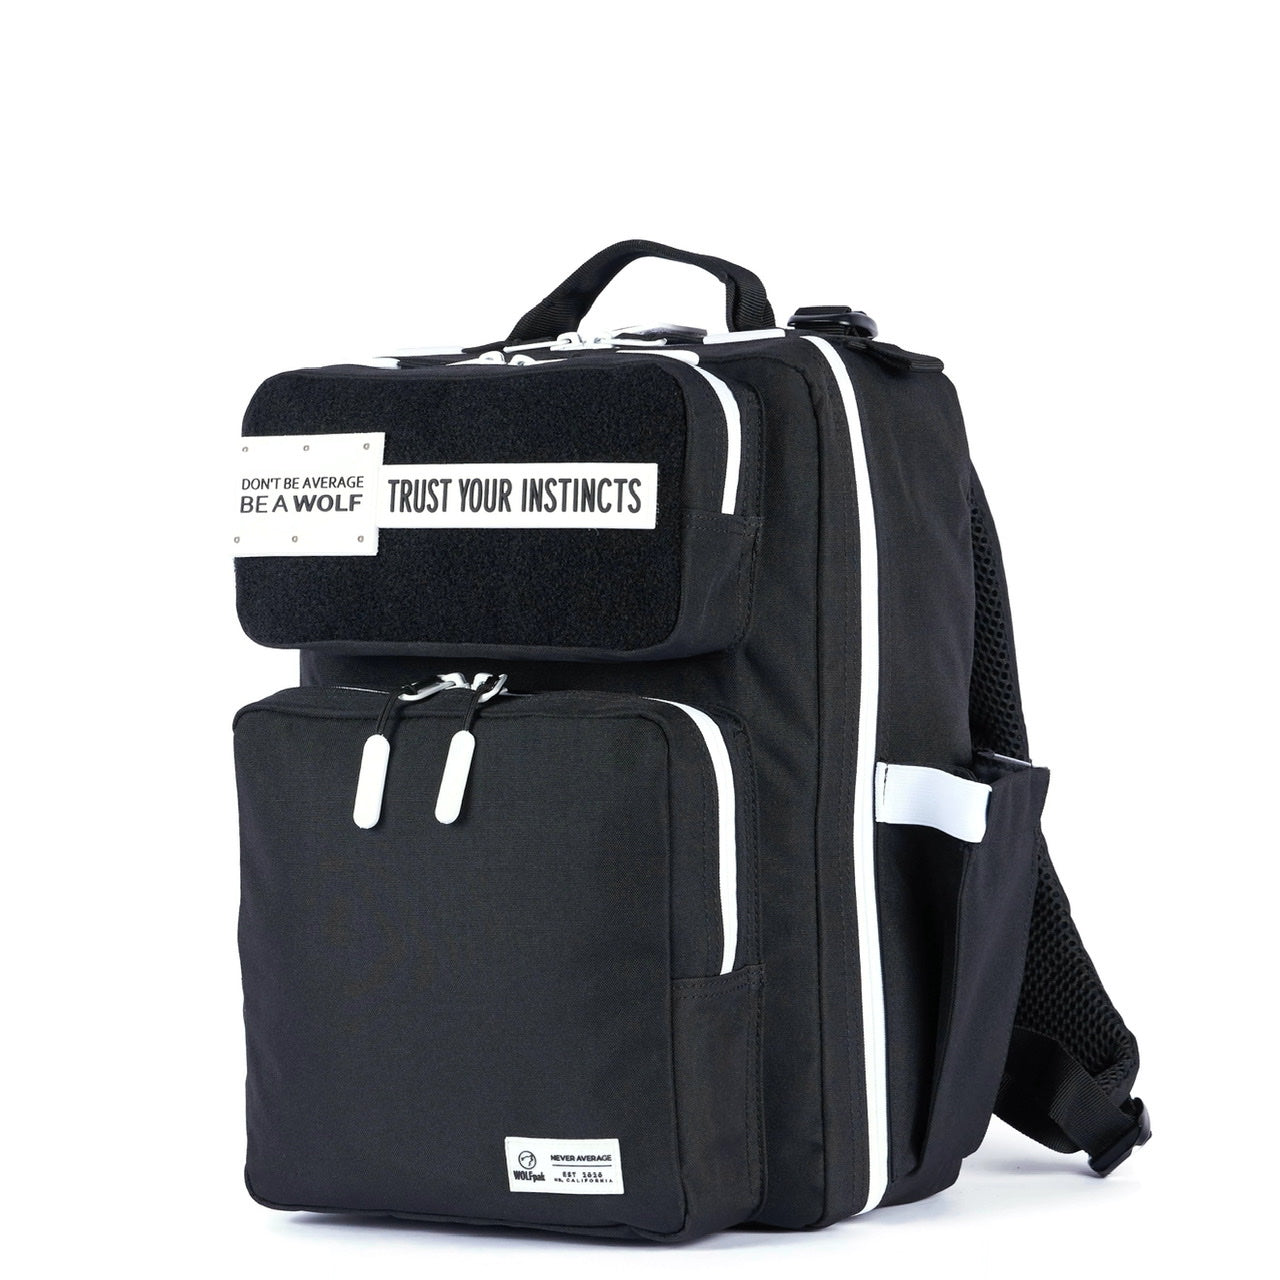 15L Backpack Alpha Black White Accents